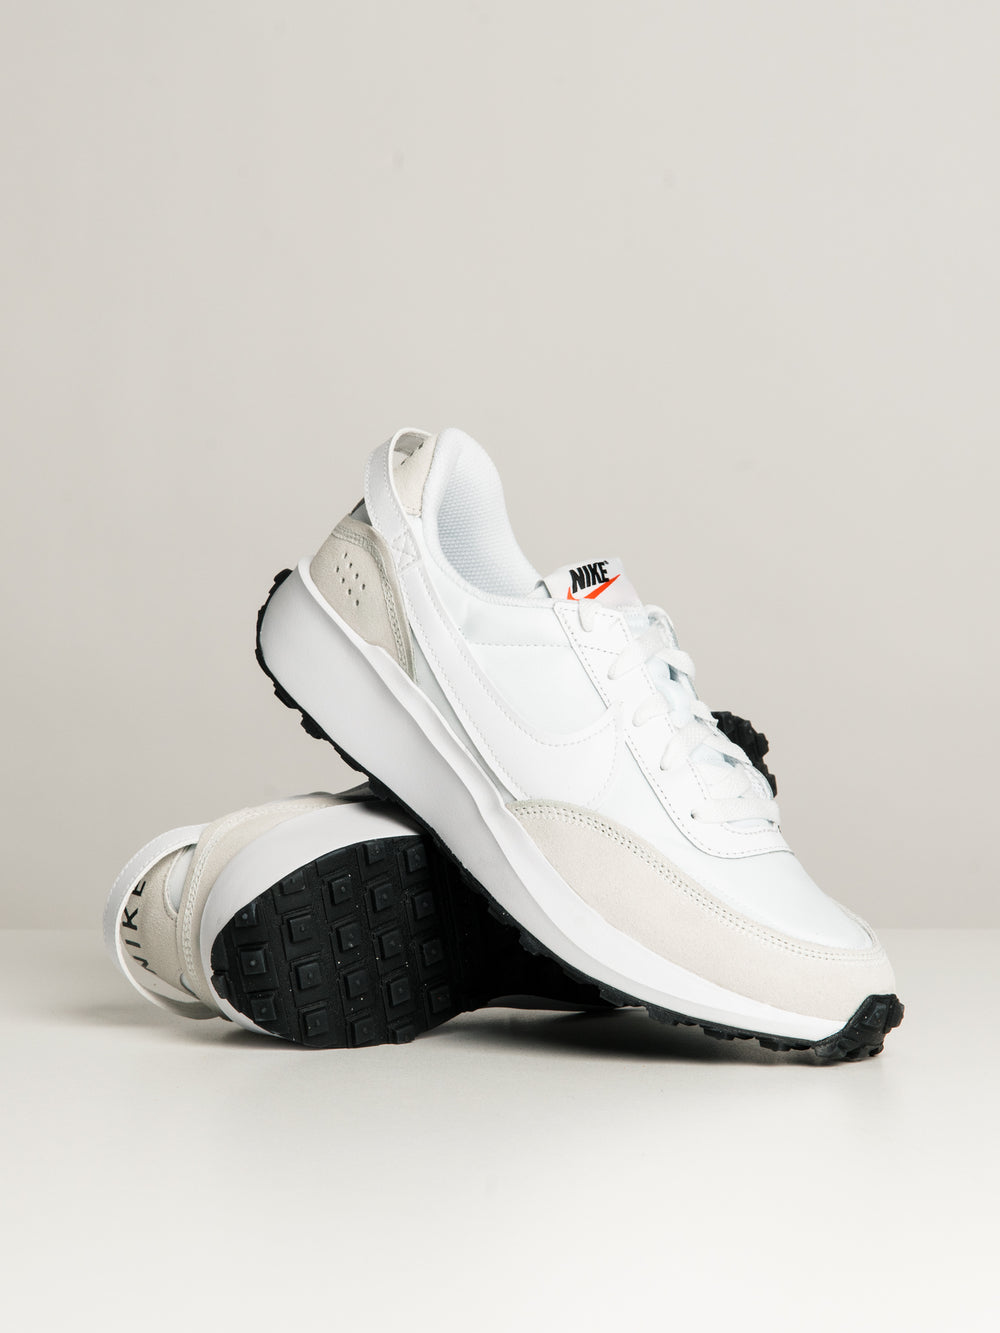 MENS NIKE WAFFLE DEBUT SNEAKERS - CLEARANCE